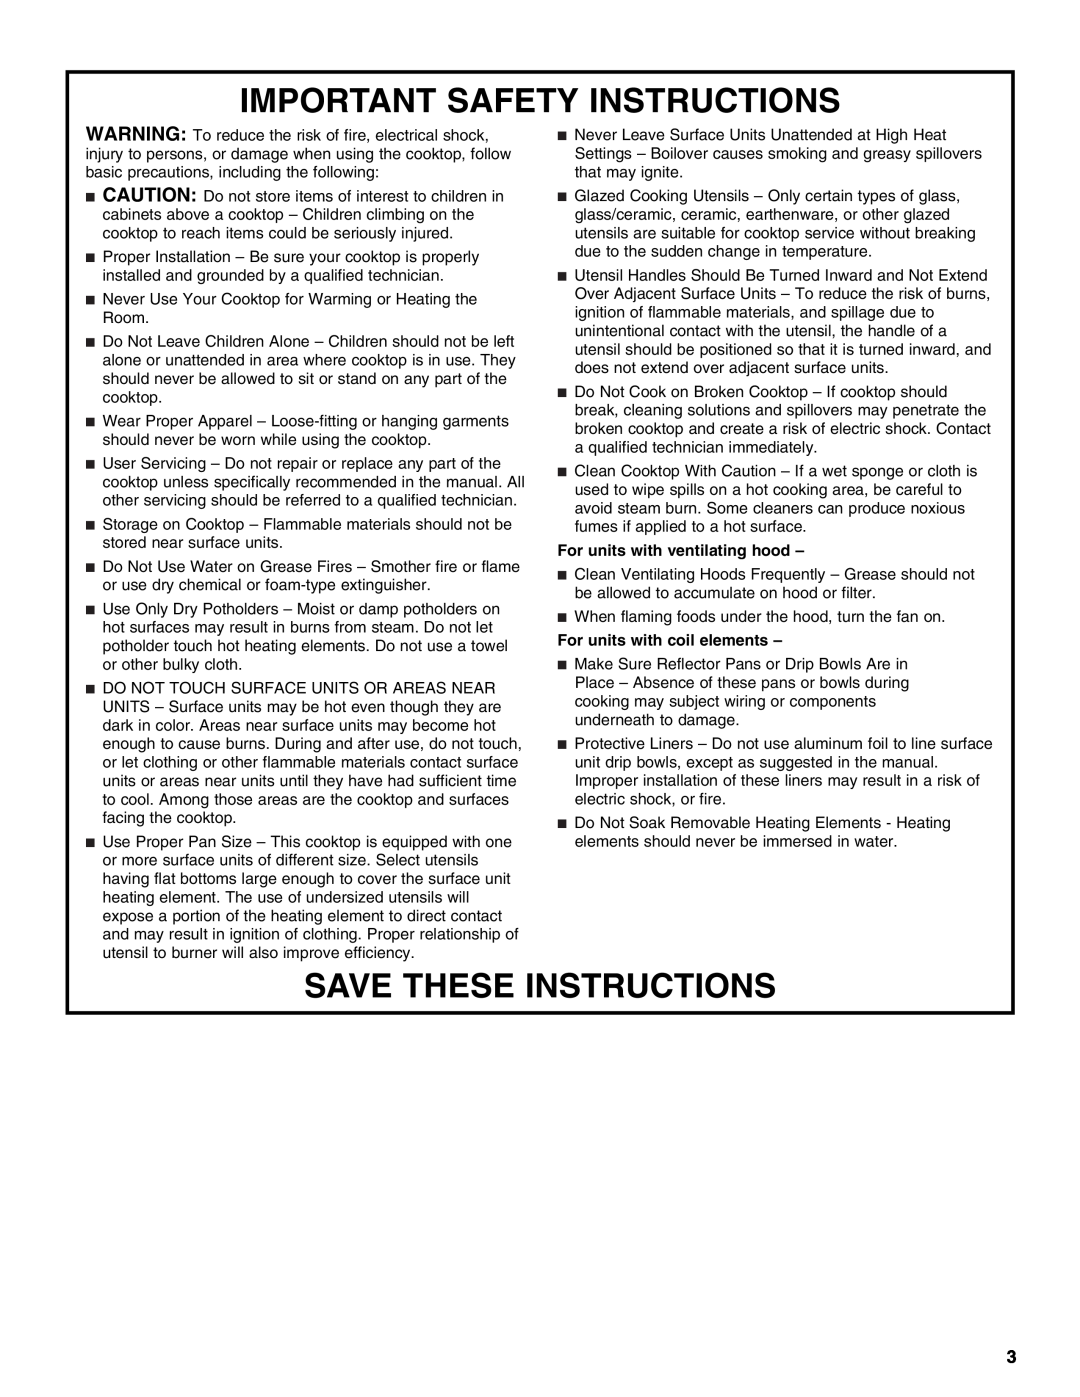 Whirlpool G9CE3675XB manual Important Safety Instructions, Save These Instructions, For units with ventilating hood 